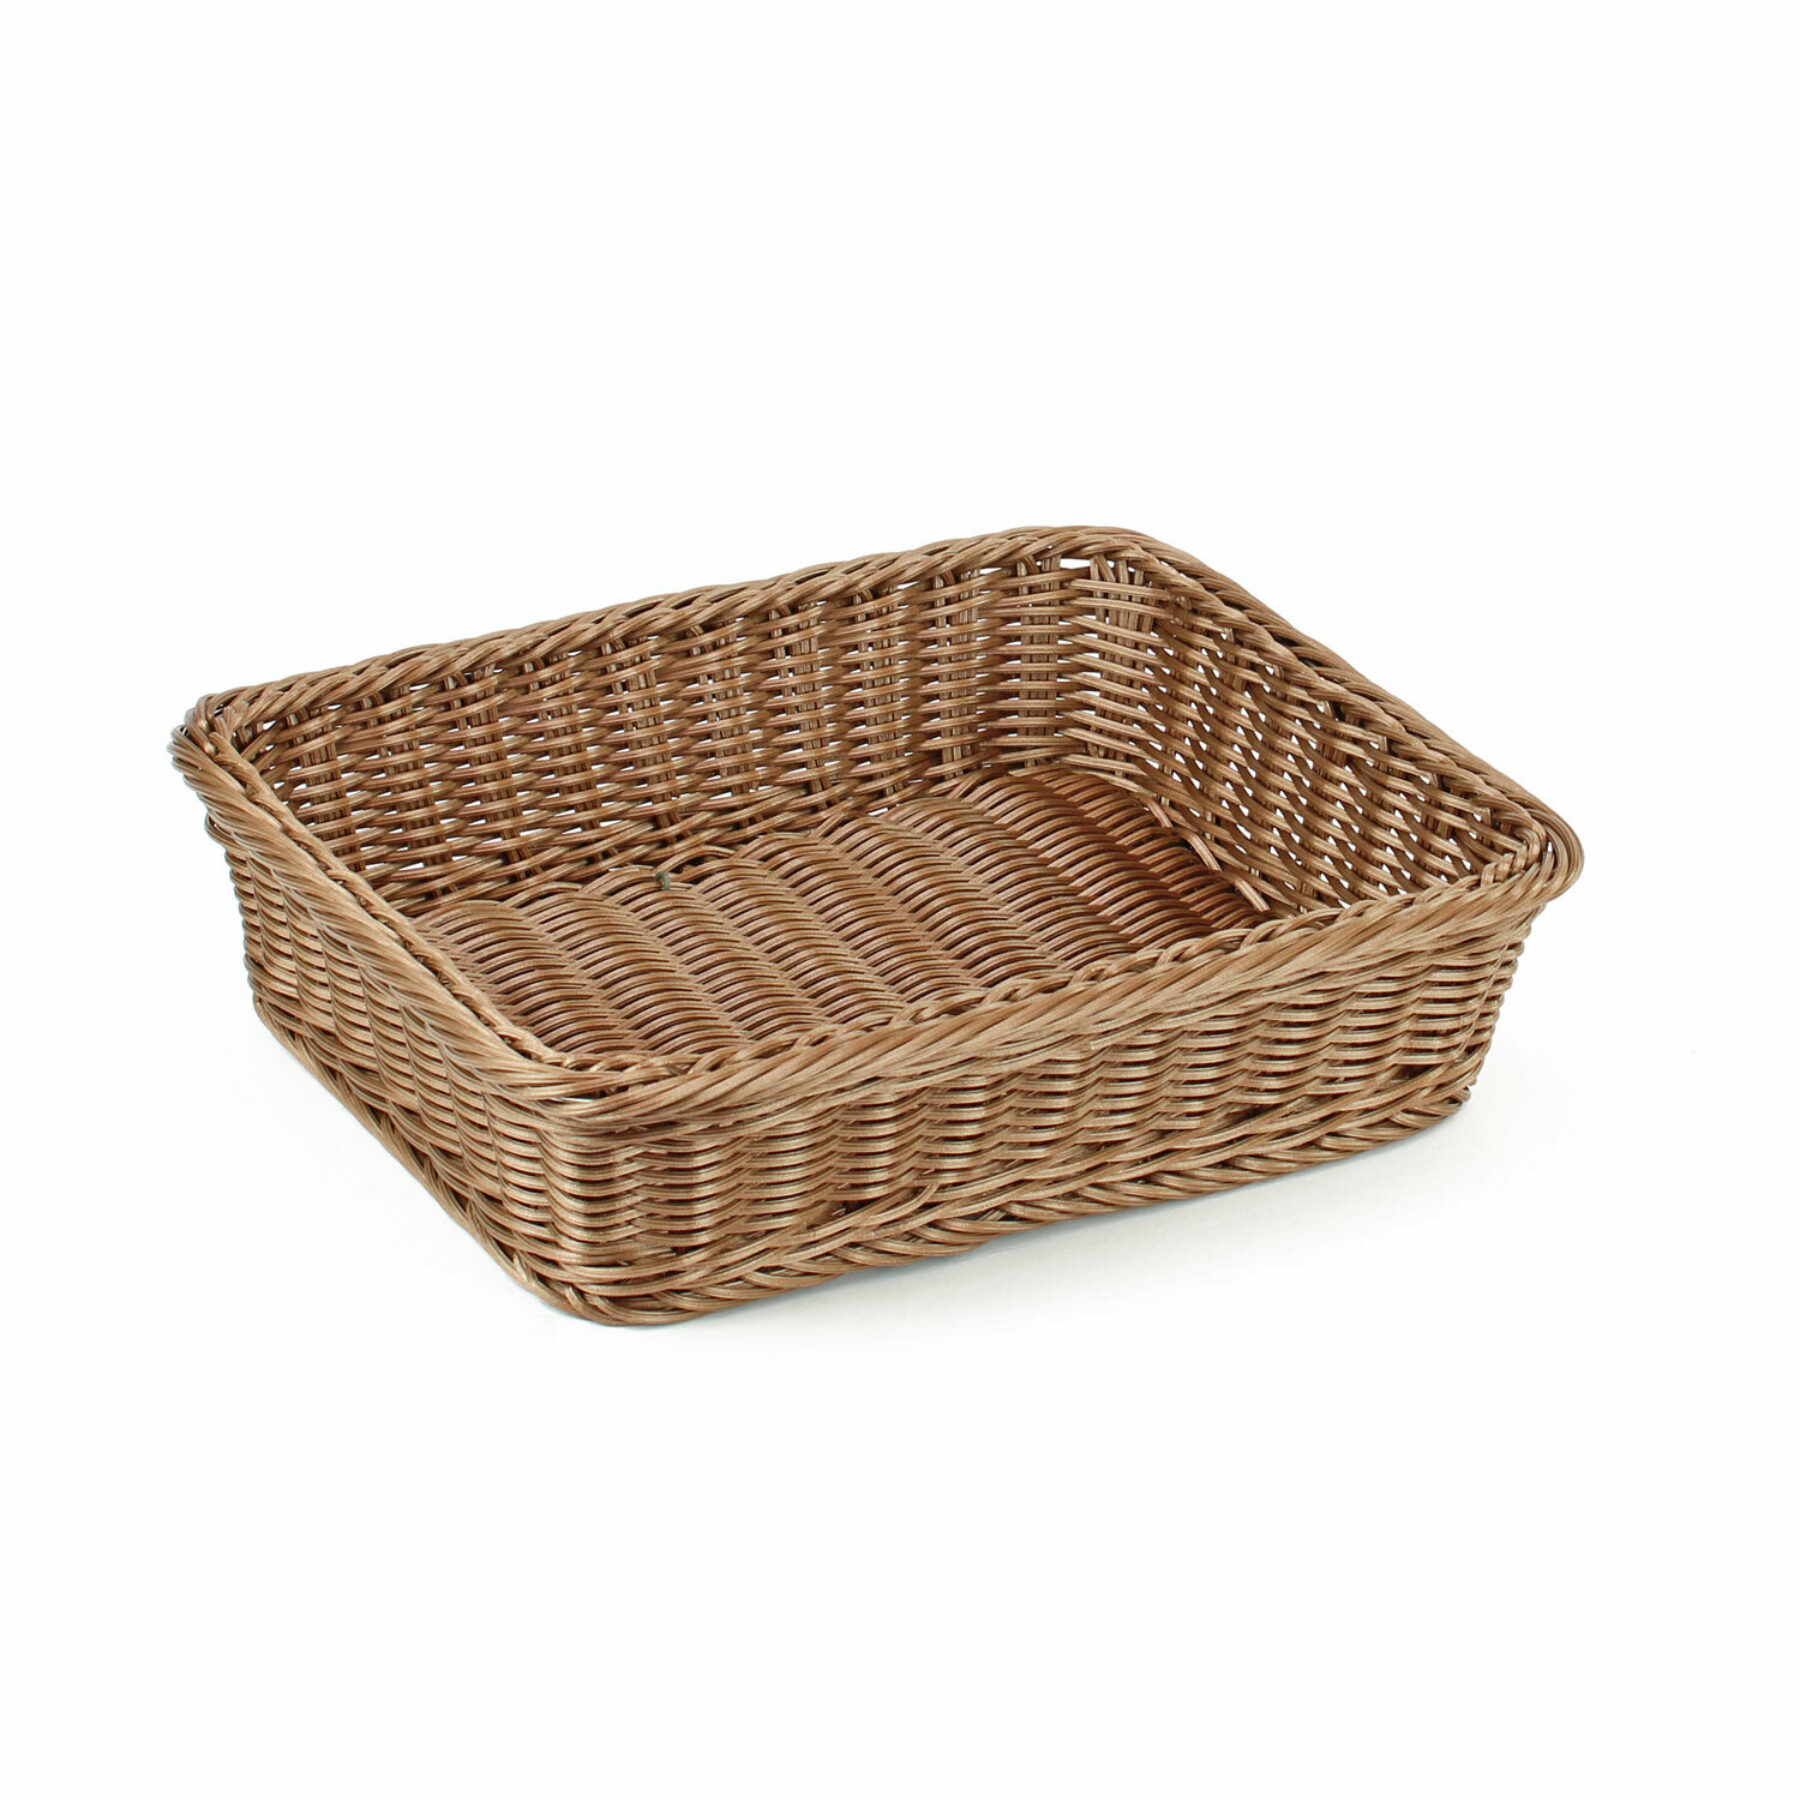 1/2 GN Taupe Polywicker Basket